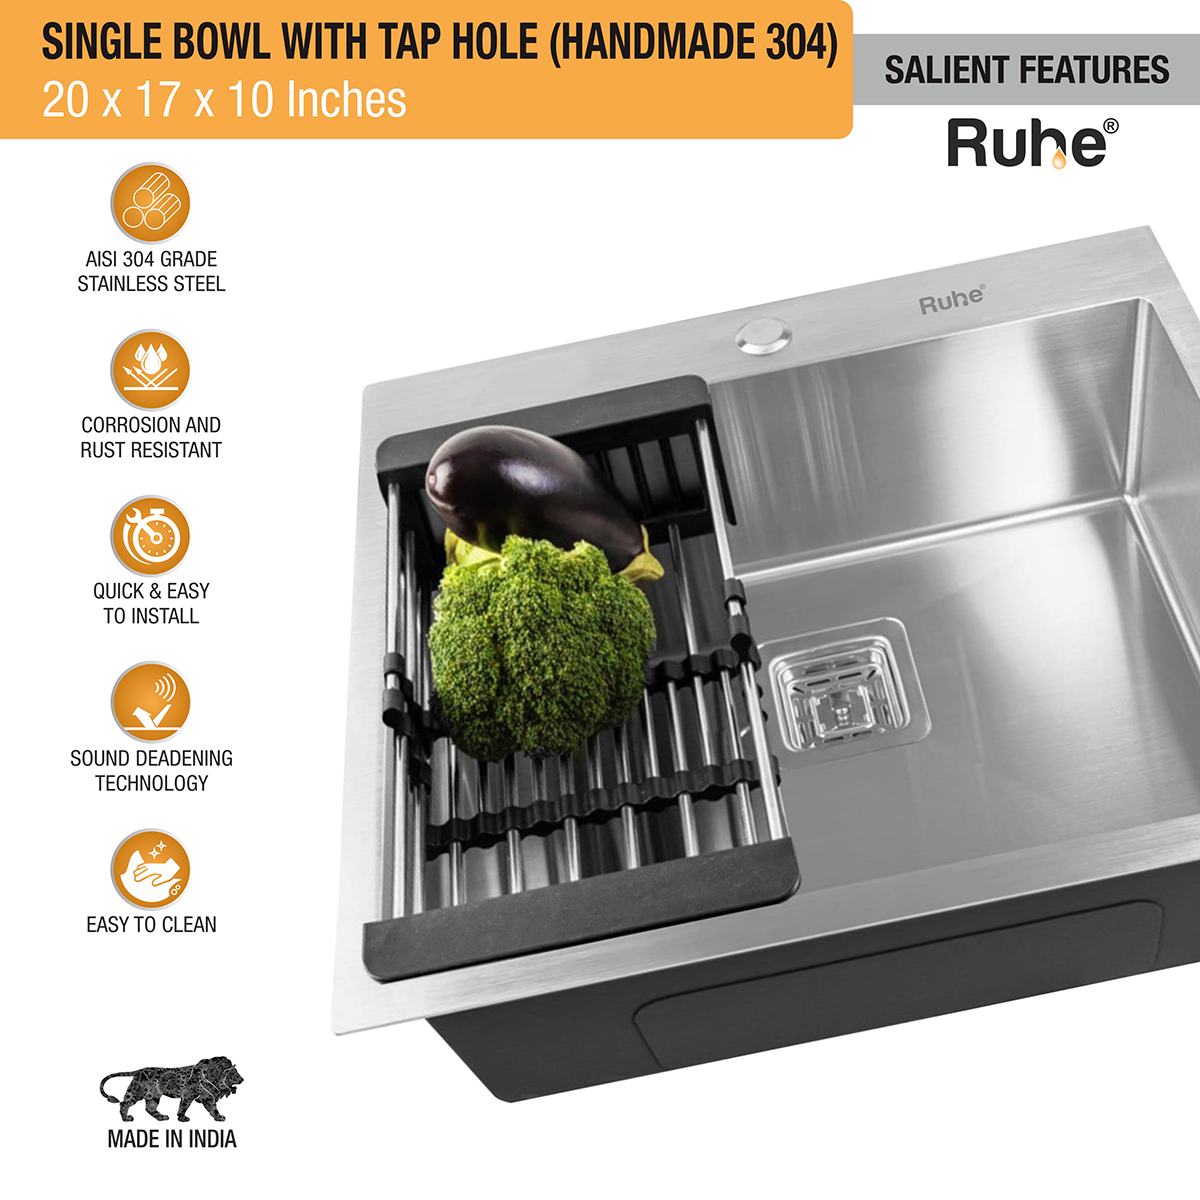 Handmade Single Bowl 304-Grade Kitchen Sink (20 x 17 x 10 Inches) with Tap Hole features and benefits